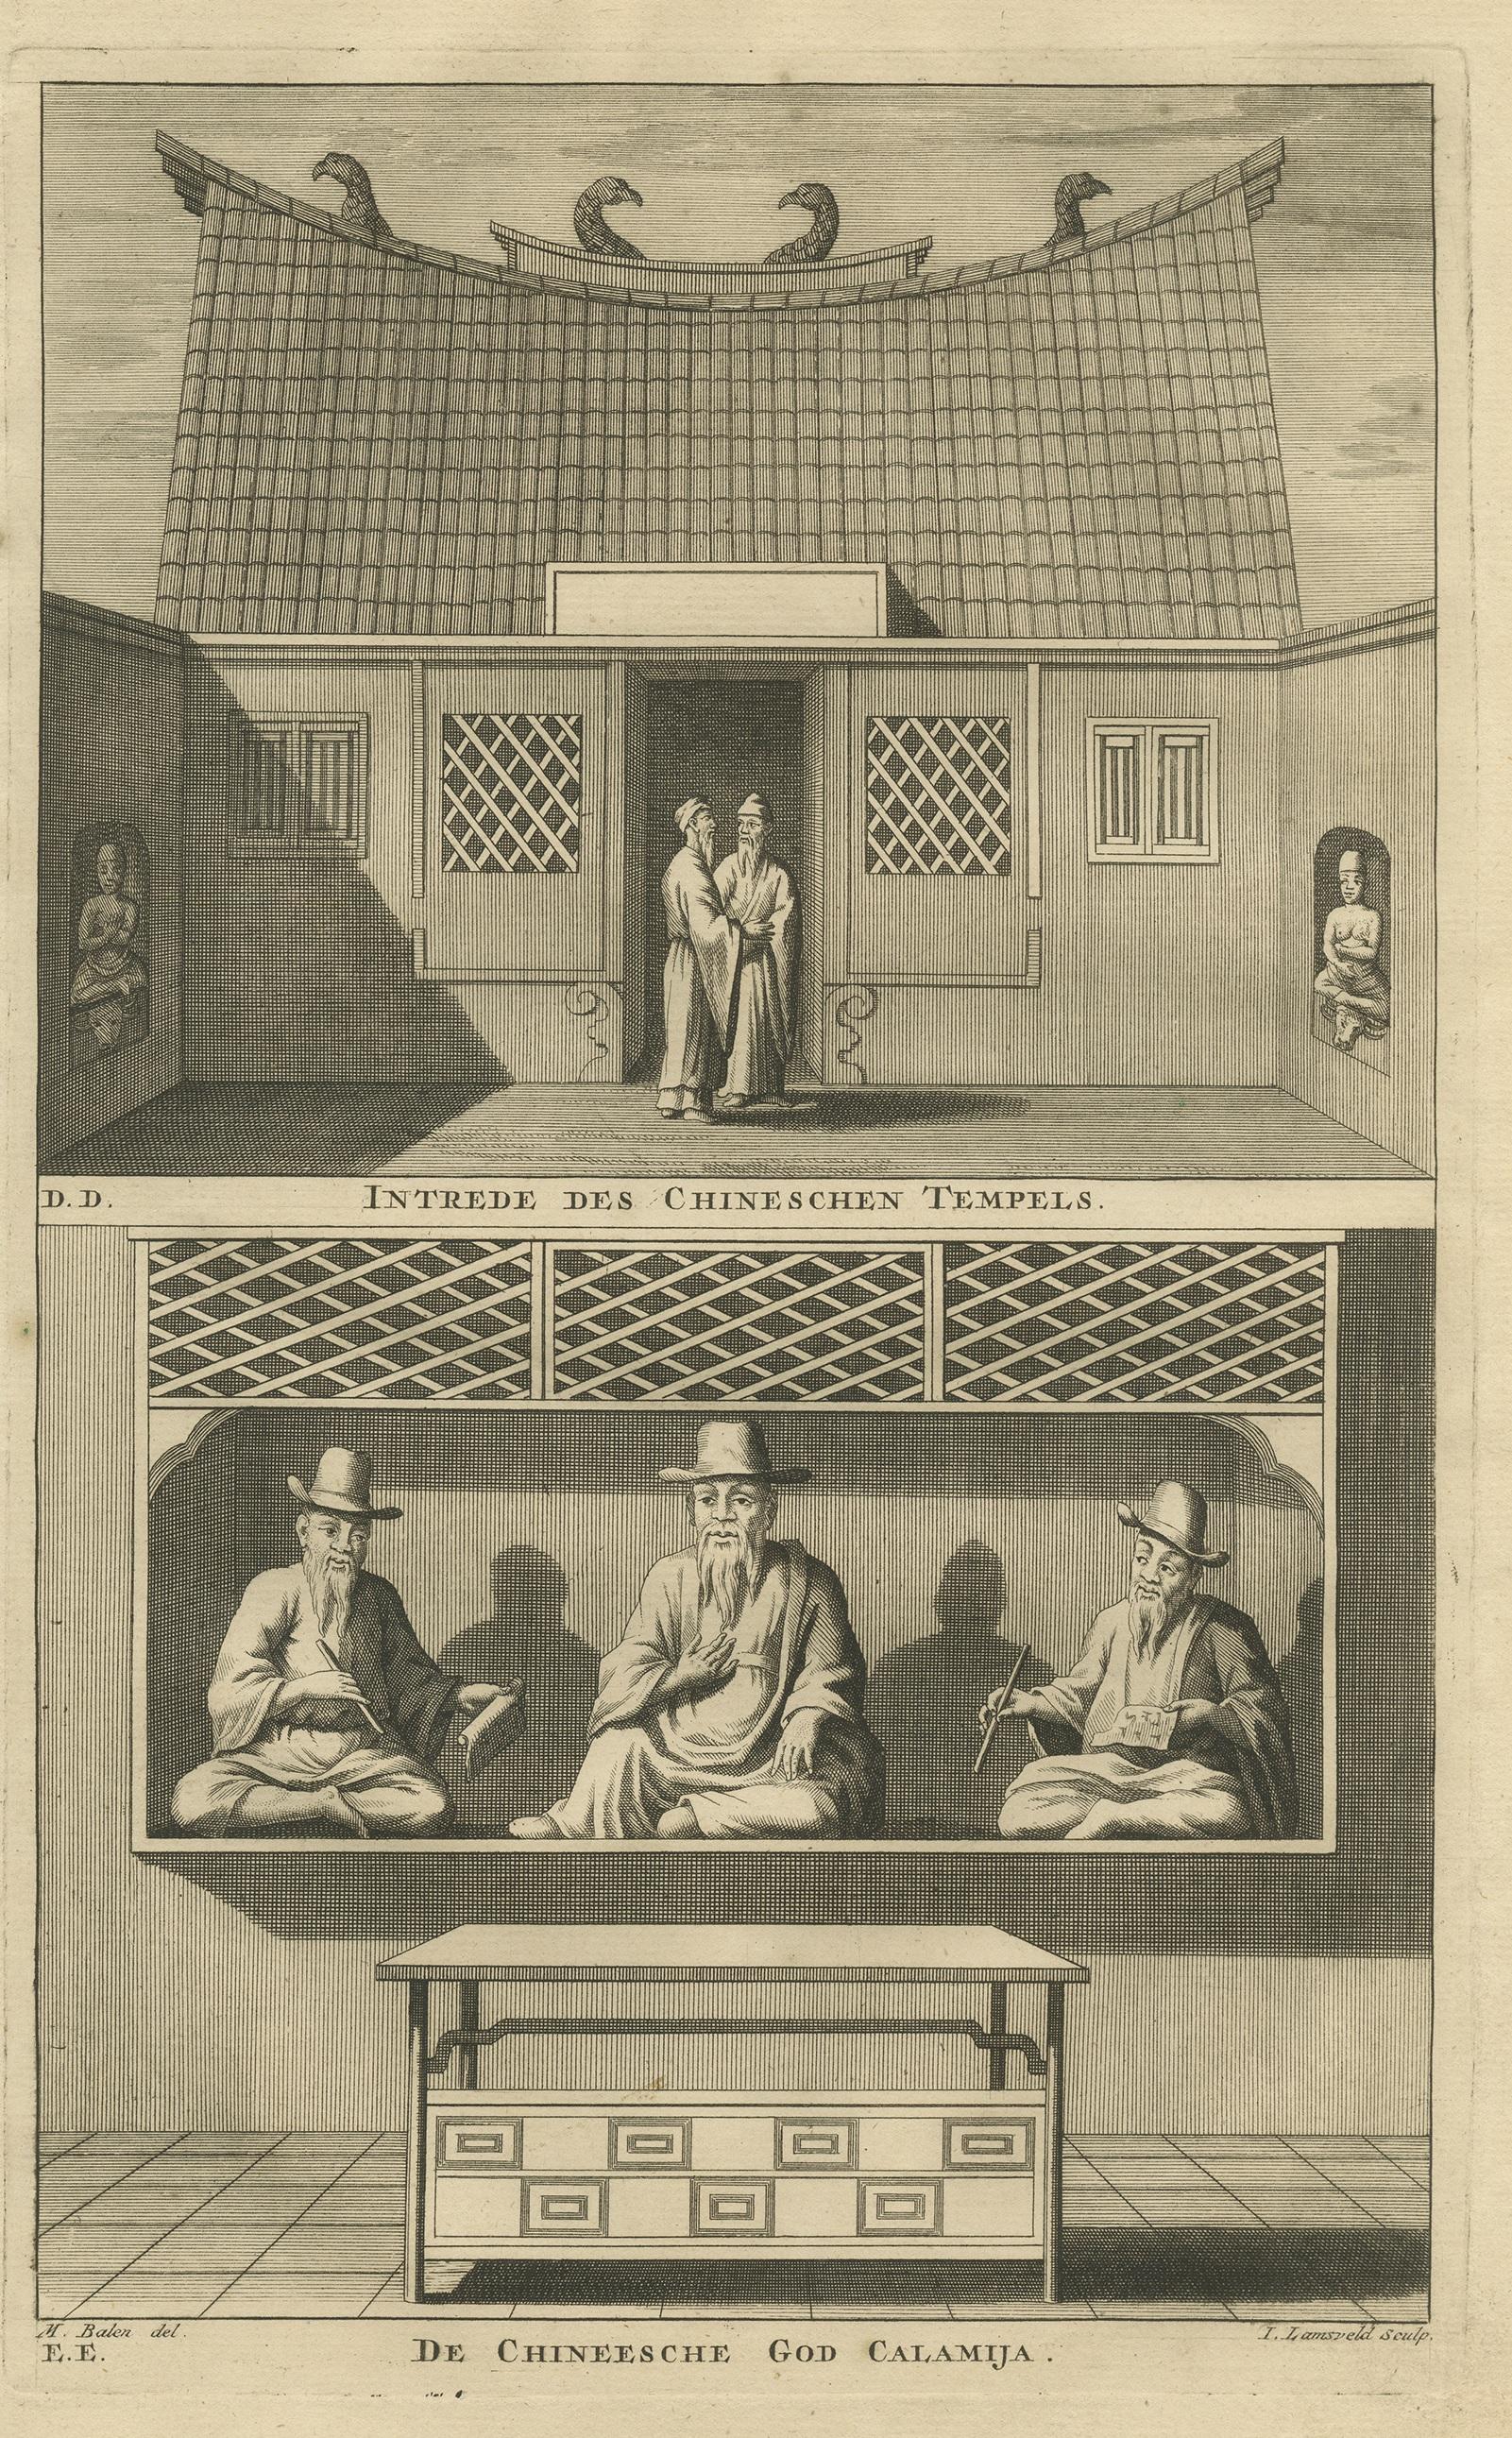 Antique print titled 'Intrede des Chineschen Tempels - De Chineesche God Calamija'. Copper engraving of the entrance of the Chinese Temple in Batavia, Indonesia. Below the Chinese deity Calamija. This print originates from 'Oud en Nieuw Oost-Indiën'